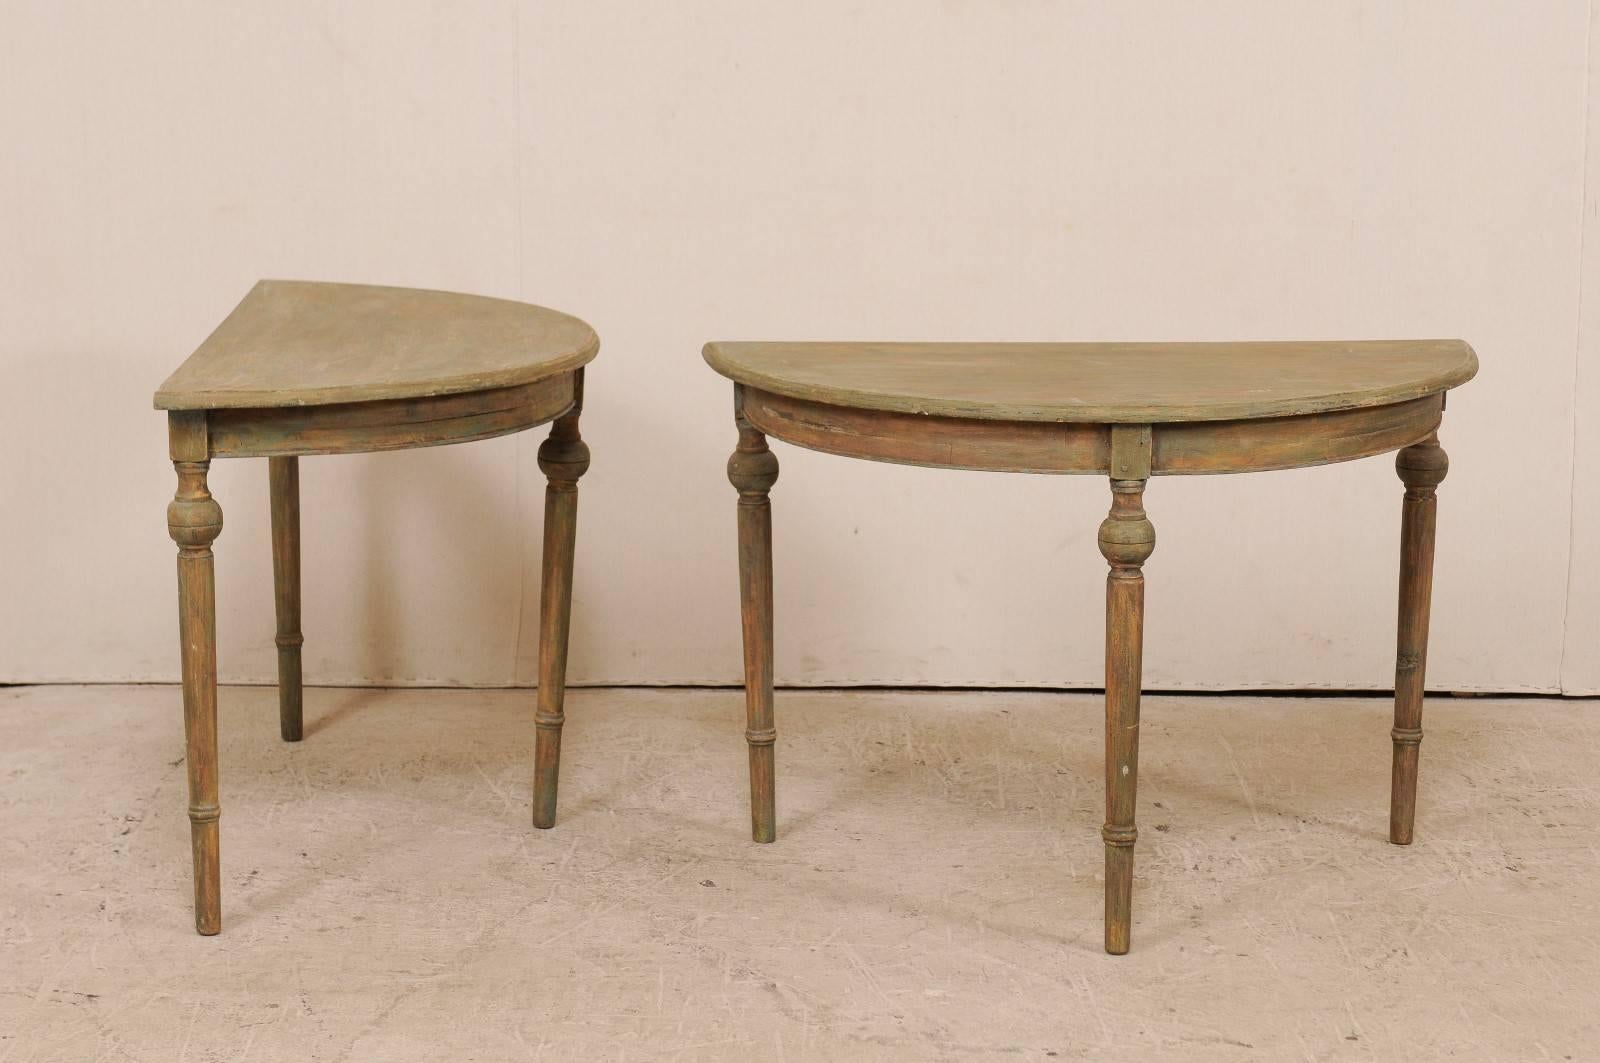 Pair of 19th Century Swedish Painted Wood Demilune Tables in Warm Sage Hues 6